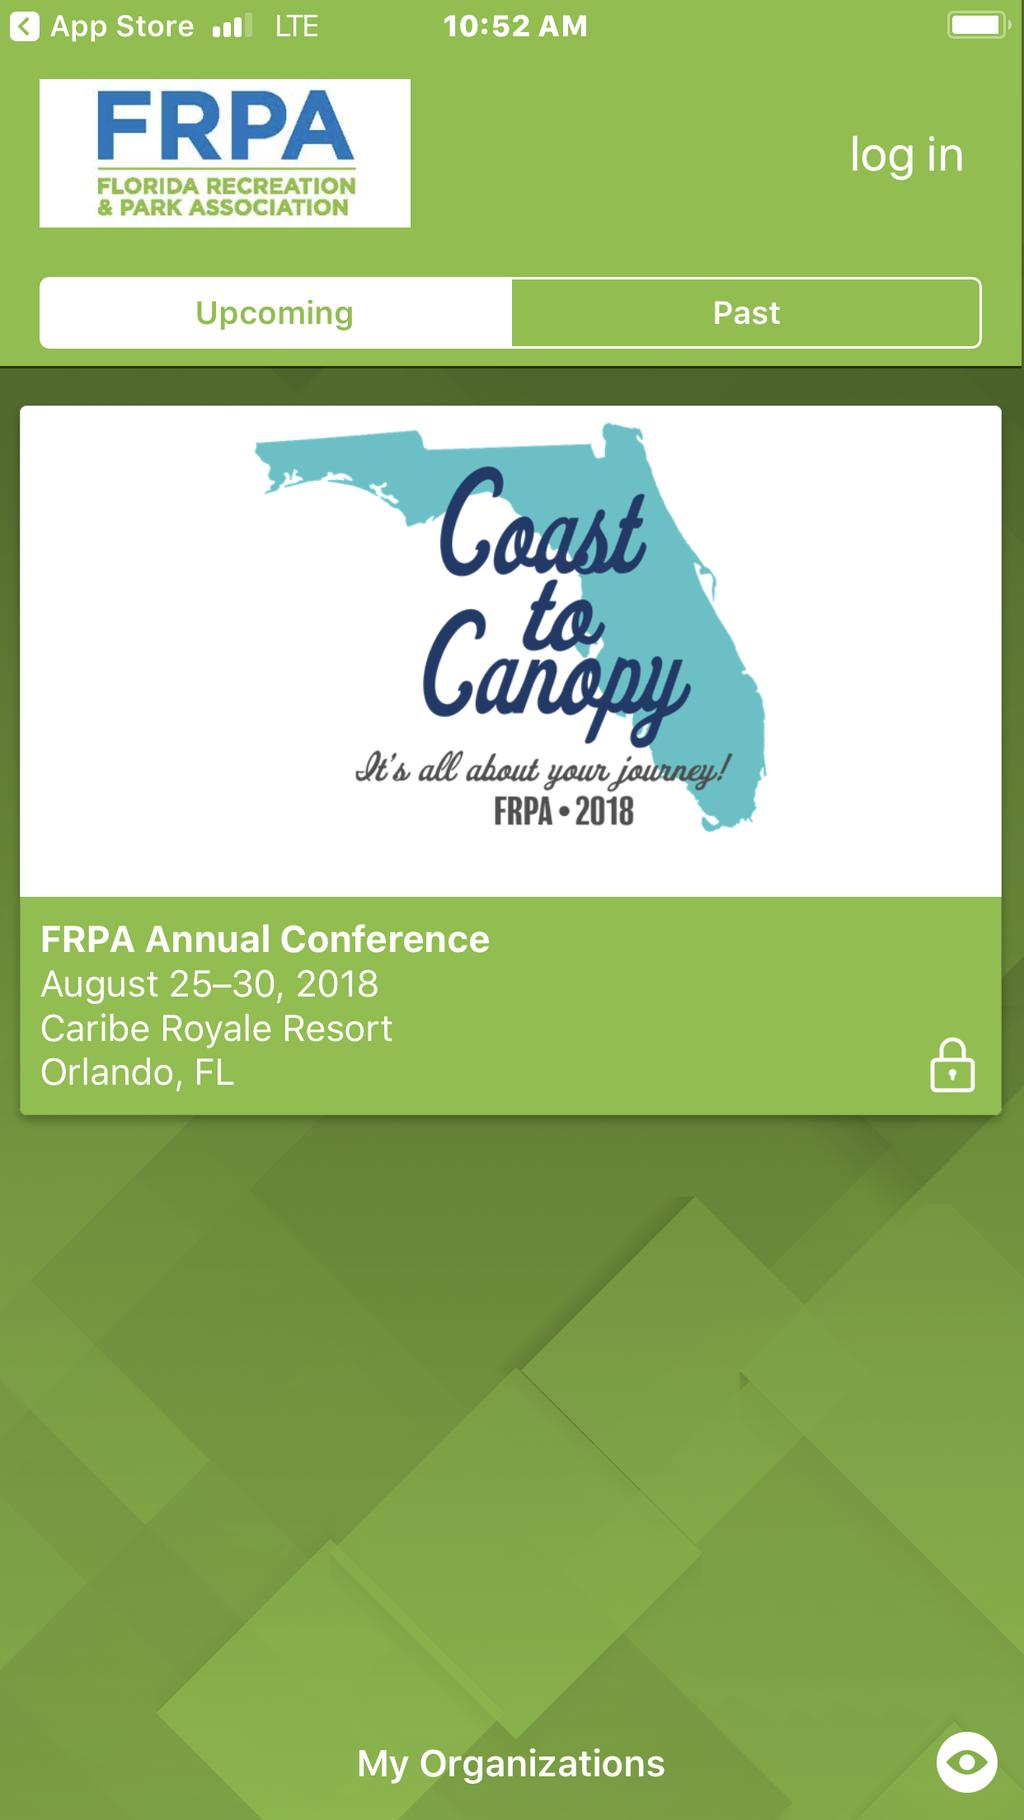 Select 2018 Conference Any current FRPA event will